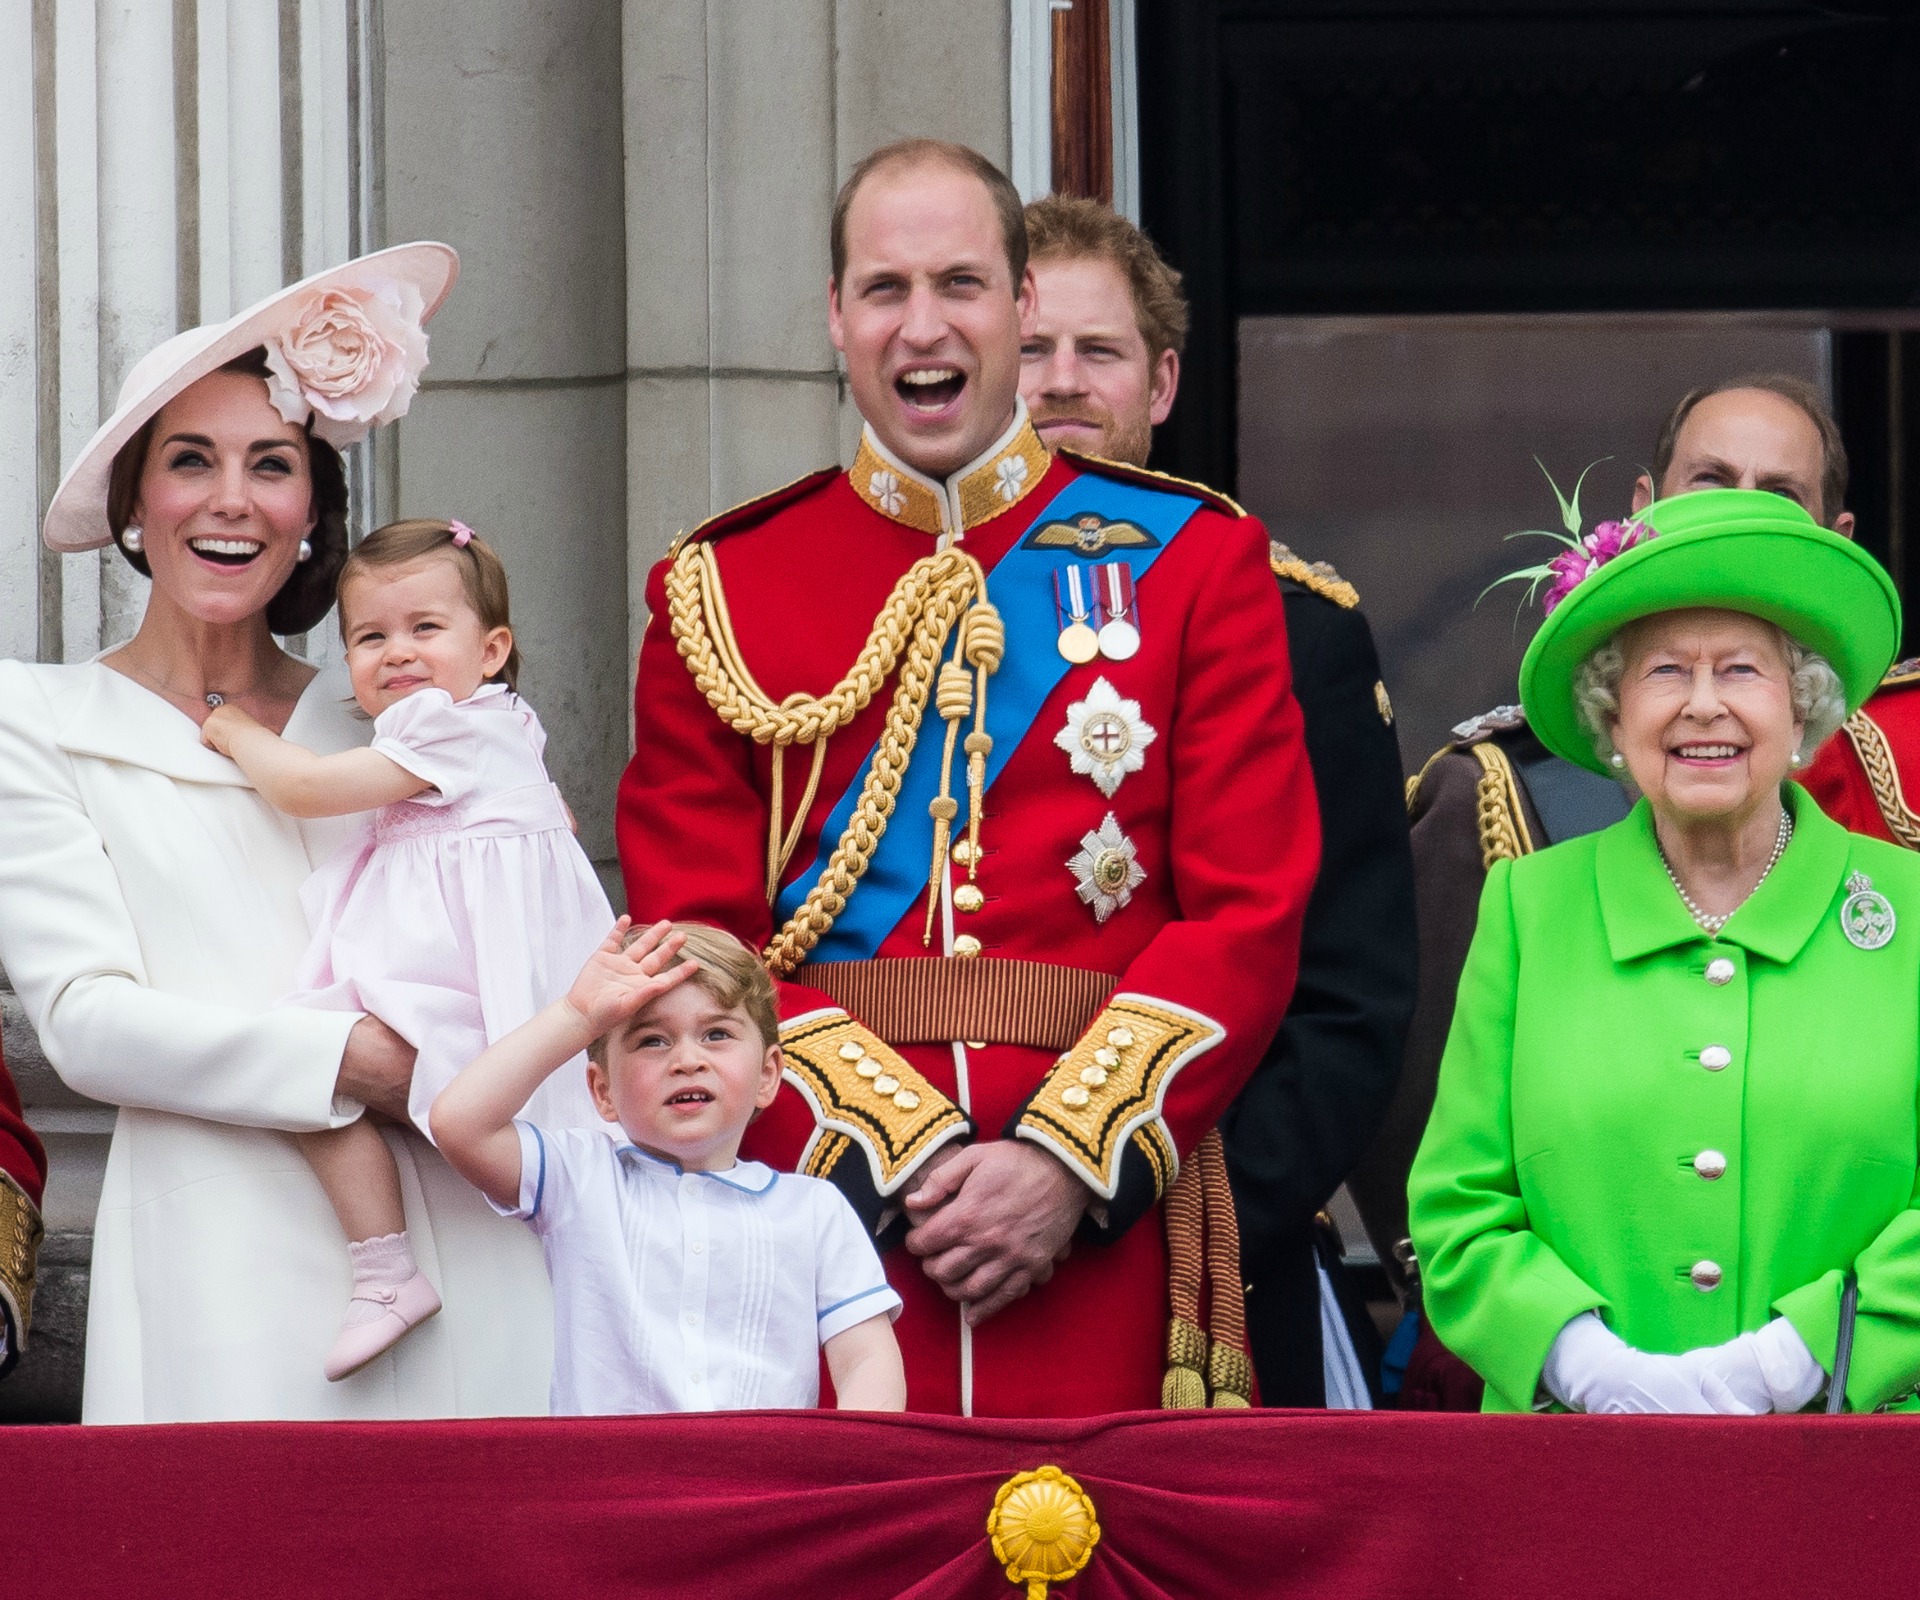 Princess Charlotte makes her first balcony appearance!